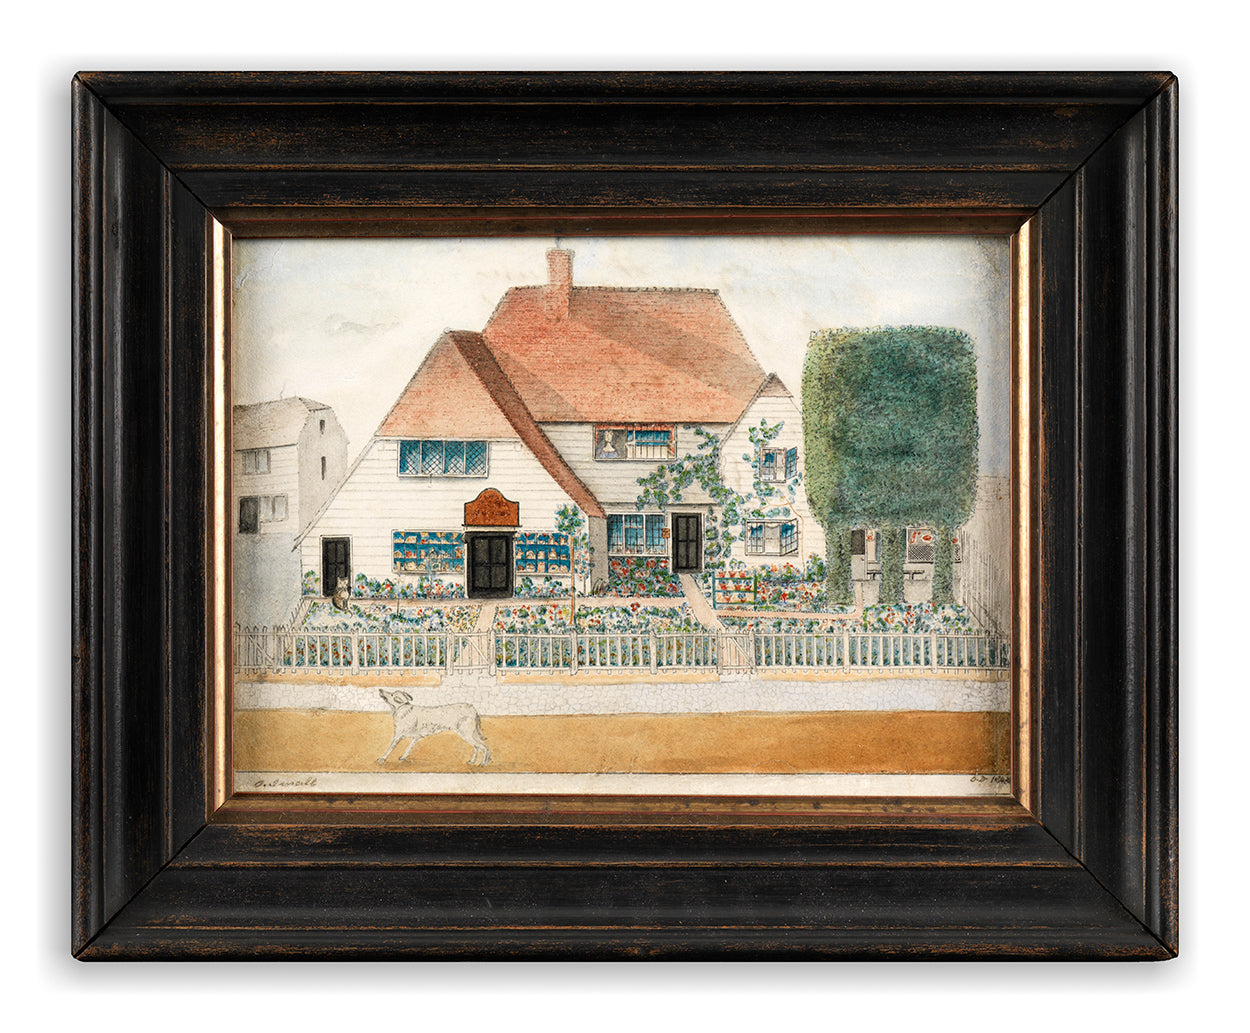 Engaging English Naïve School Portrait of a Gable Ended Cottage